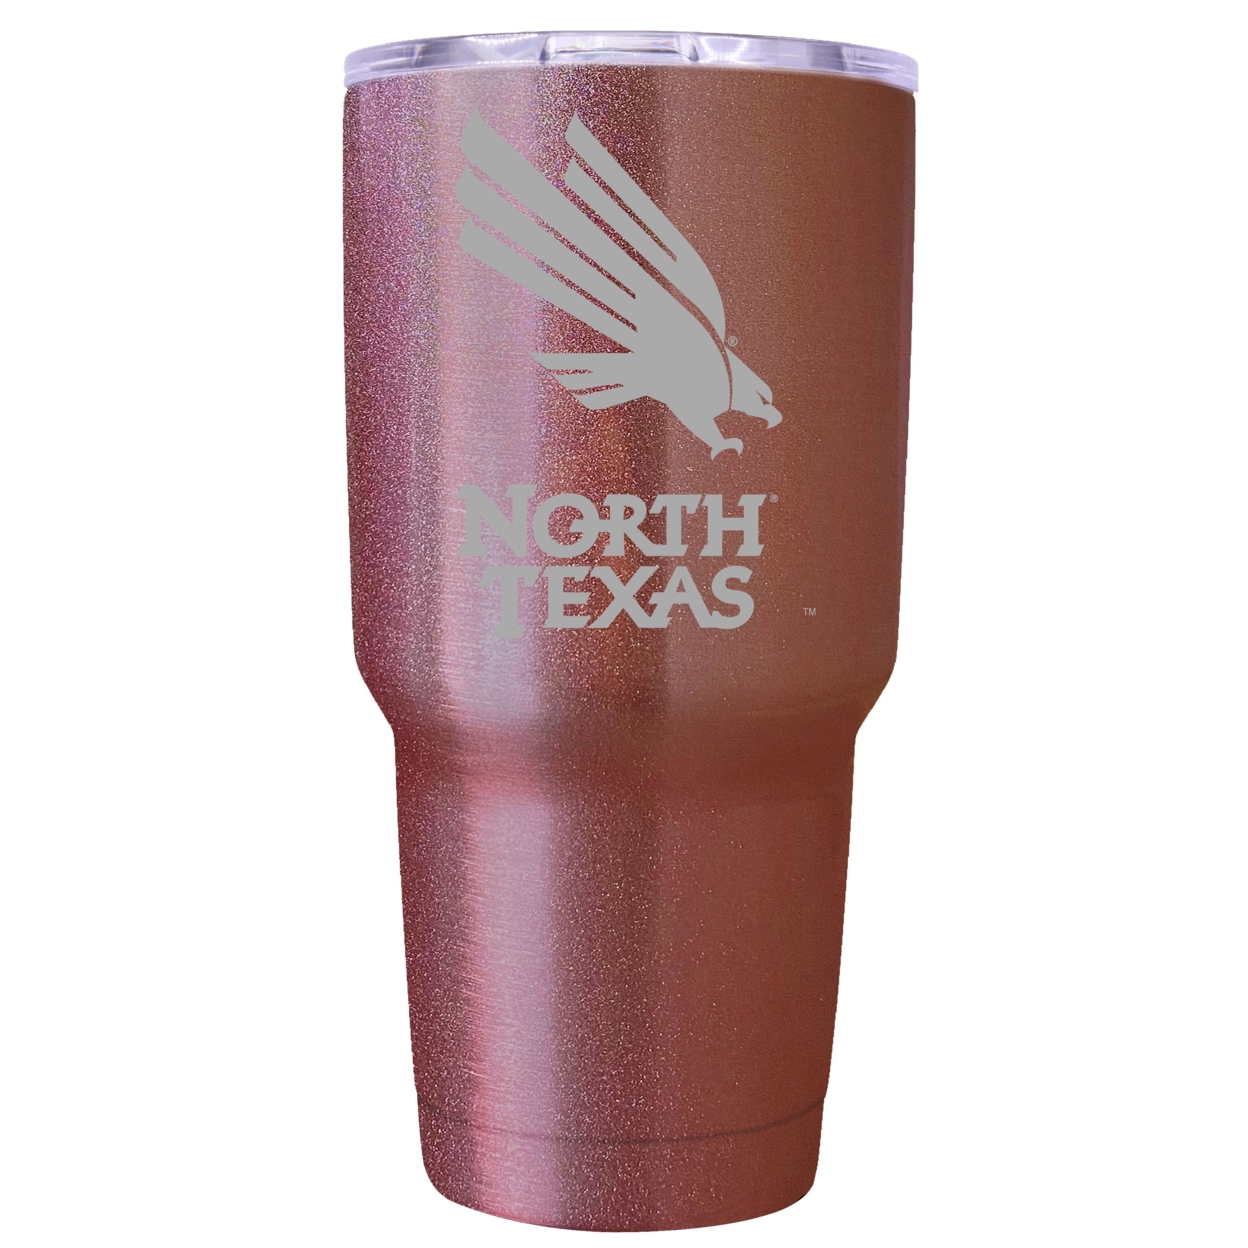 North Texas 24 Oz Insulated Tumbler Etched - Rose Gold